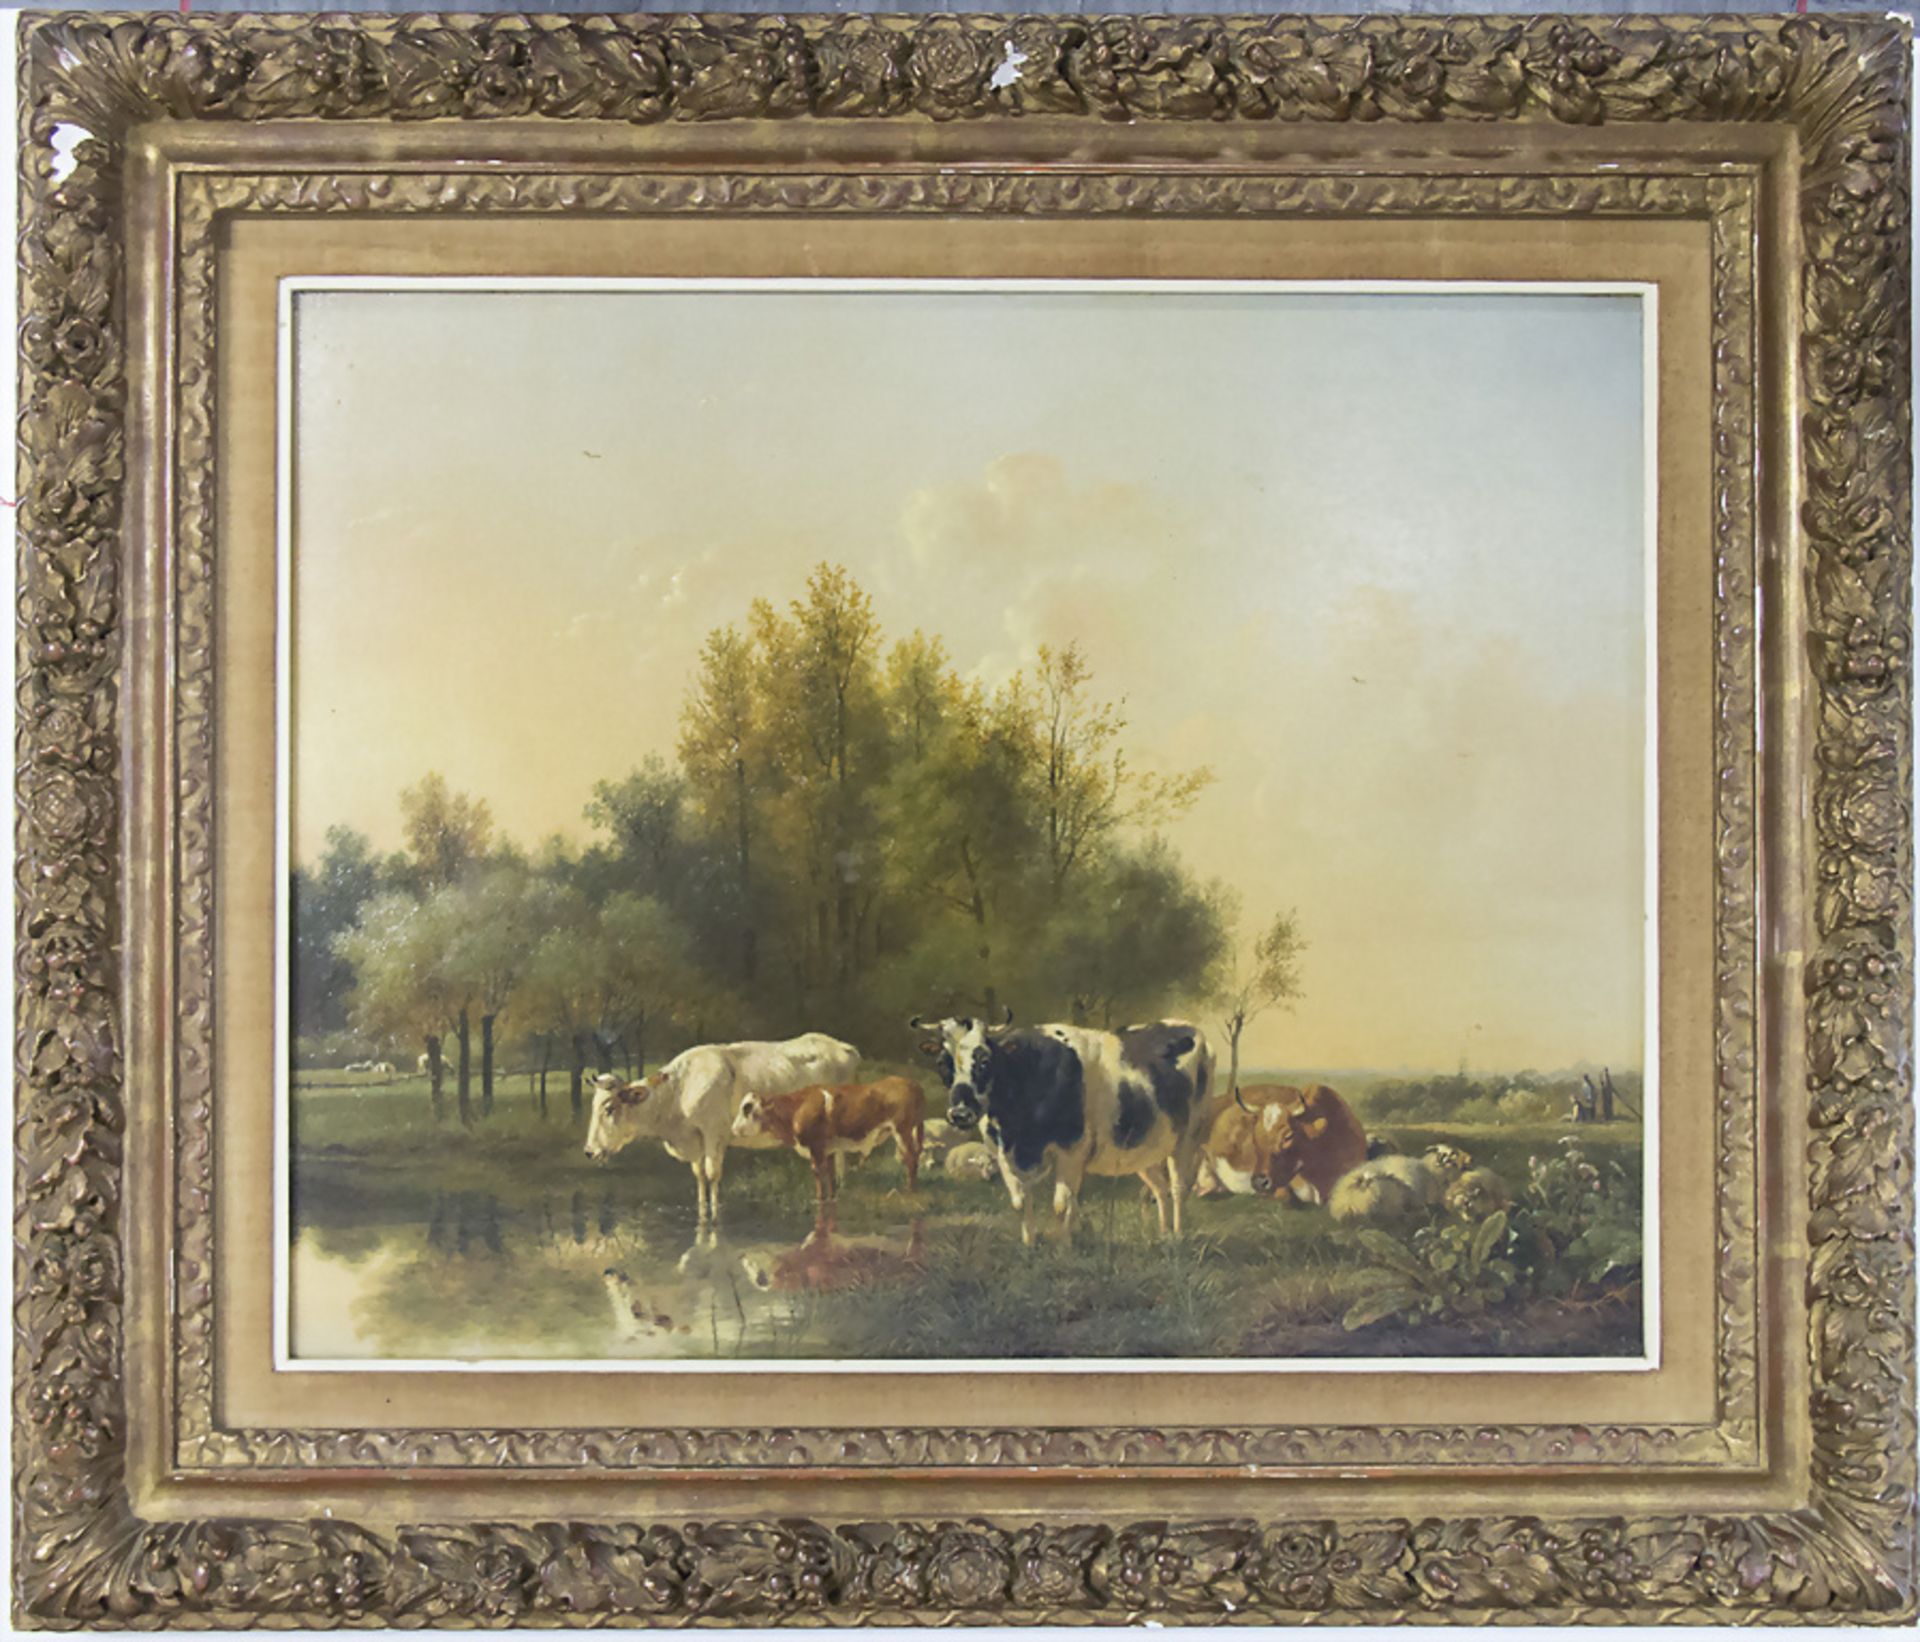 Pieter Frederick VAN OS (1808-1892), 'Kuhherde am Flußufer' / 'A herd of cows by a riverscape' - Image 3 of 5